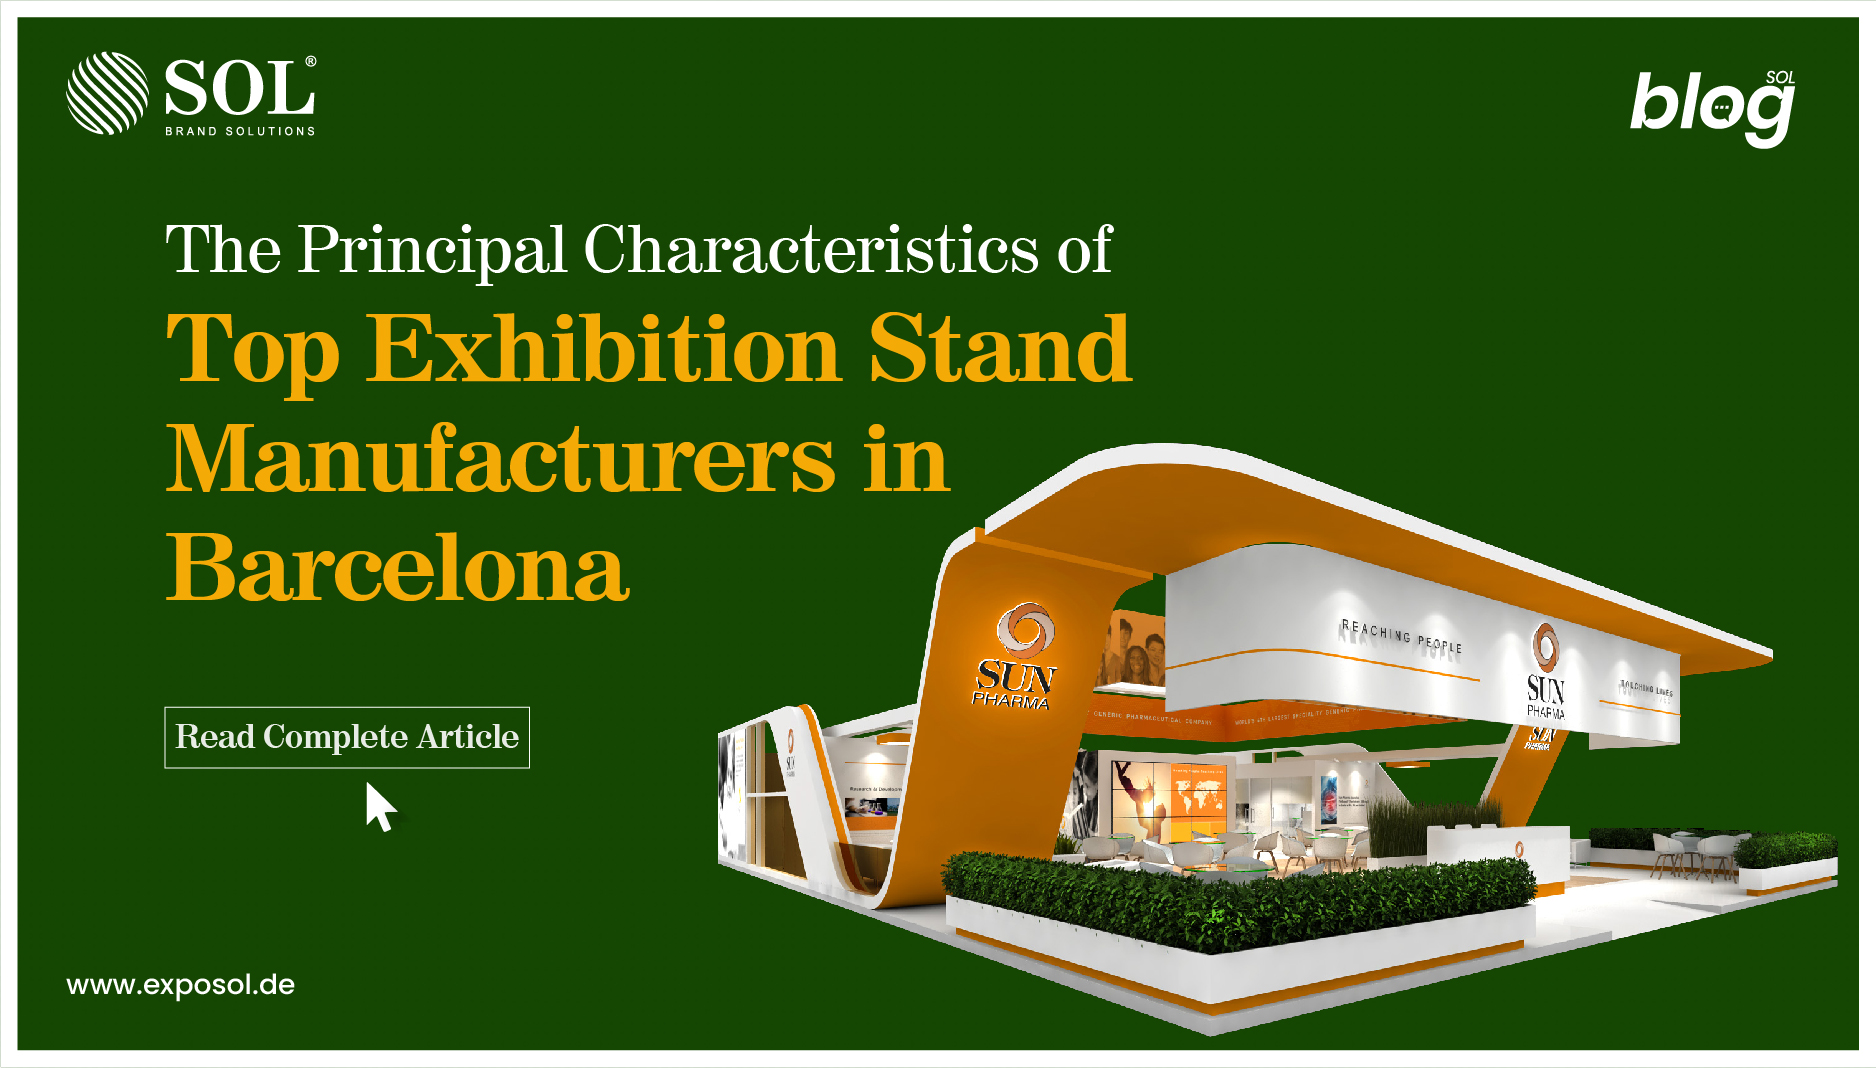 Features of Top Exhibition Stand Manufacturers in Barcelona